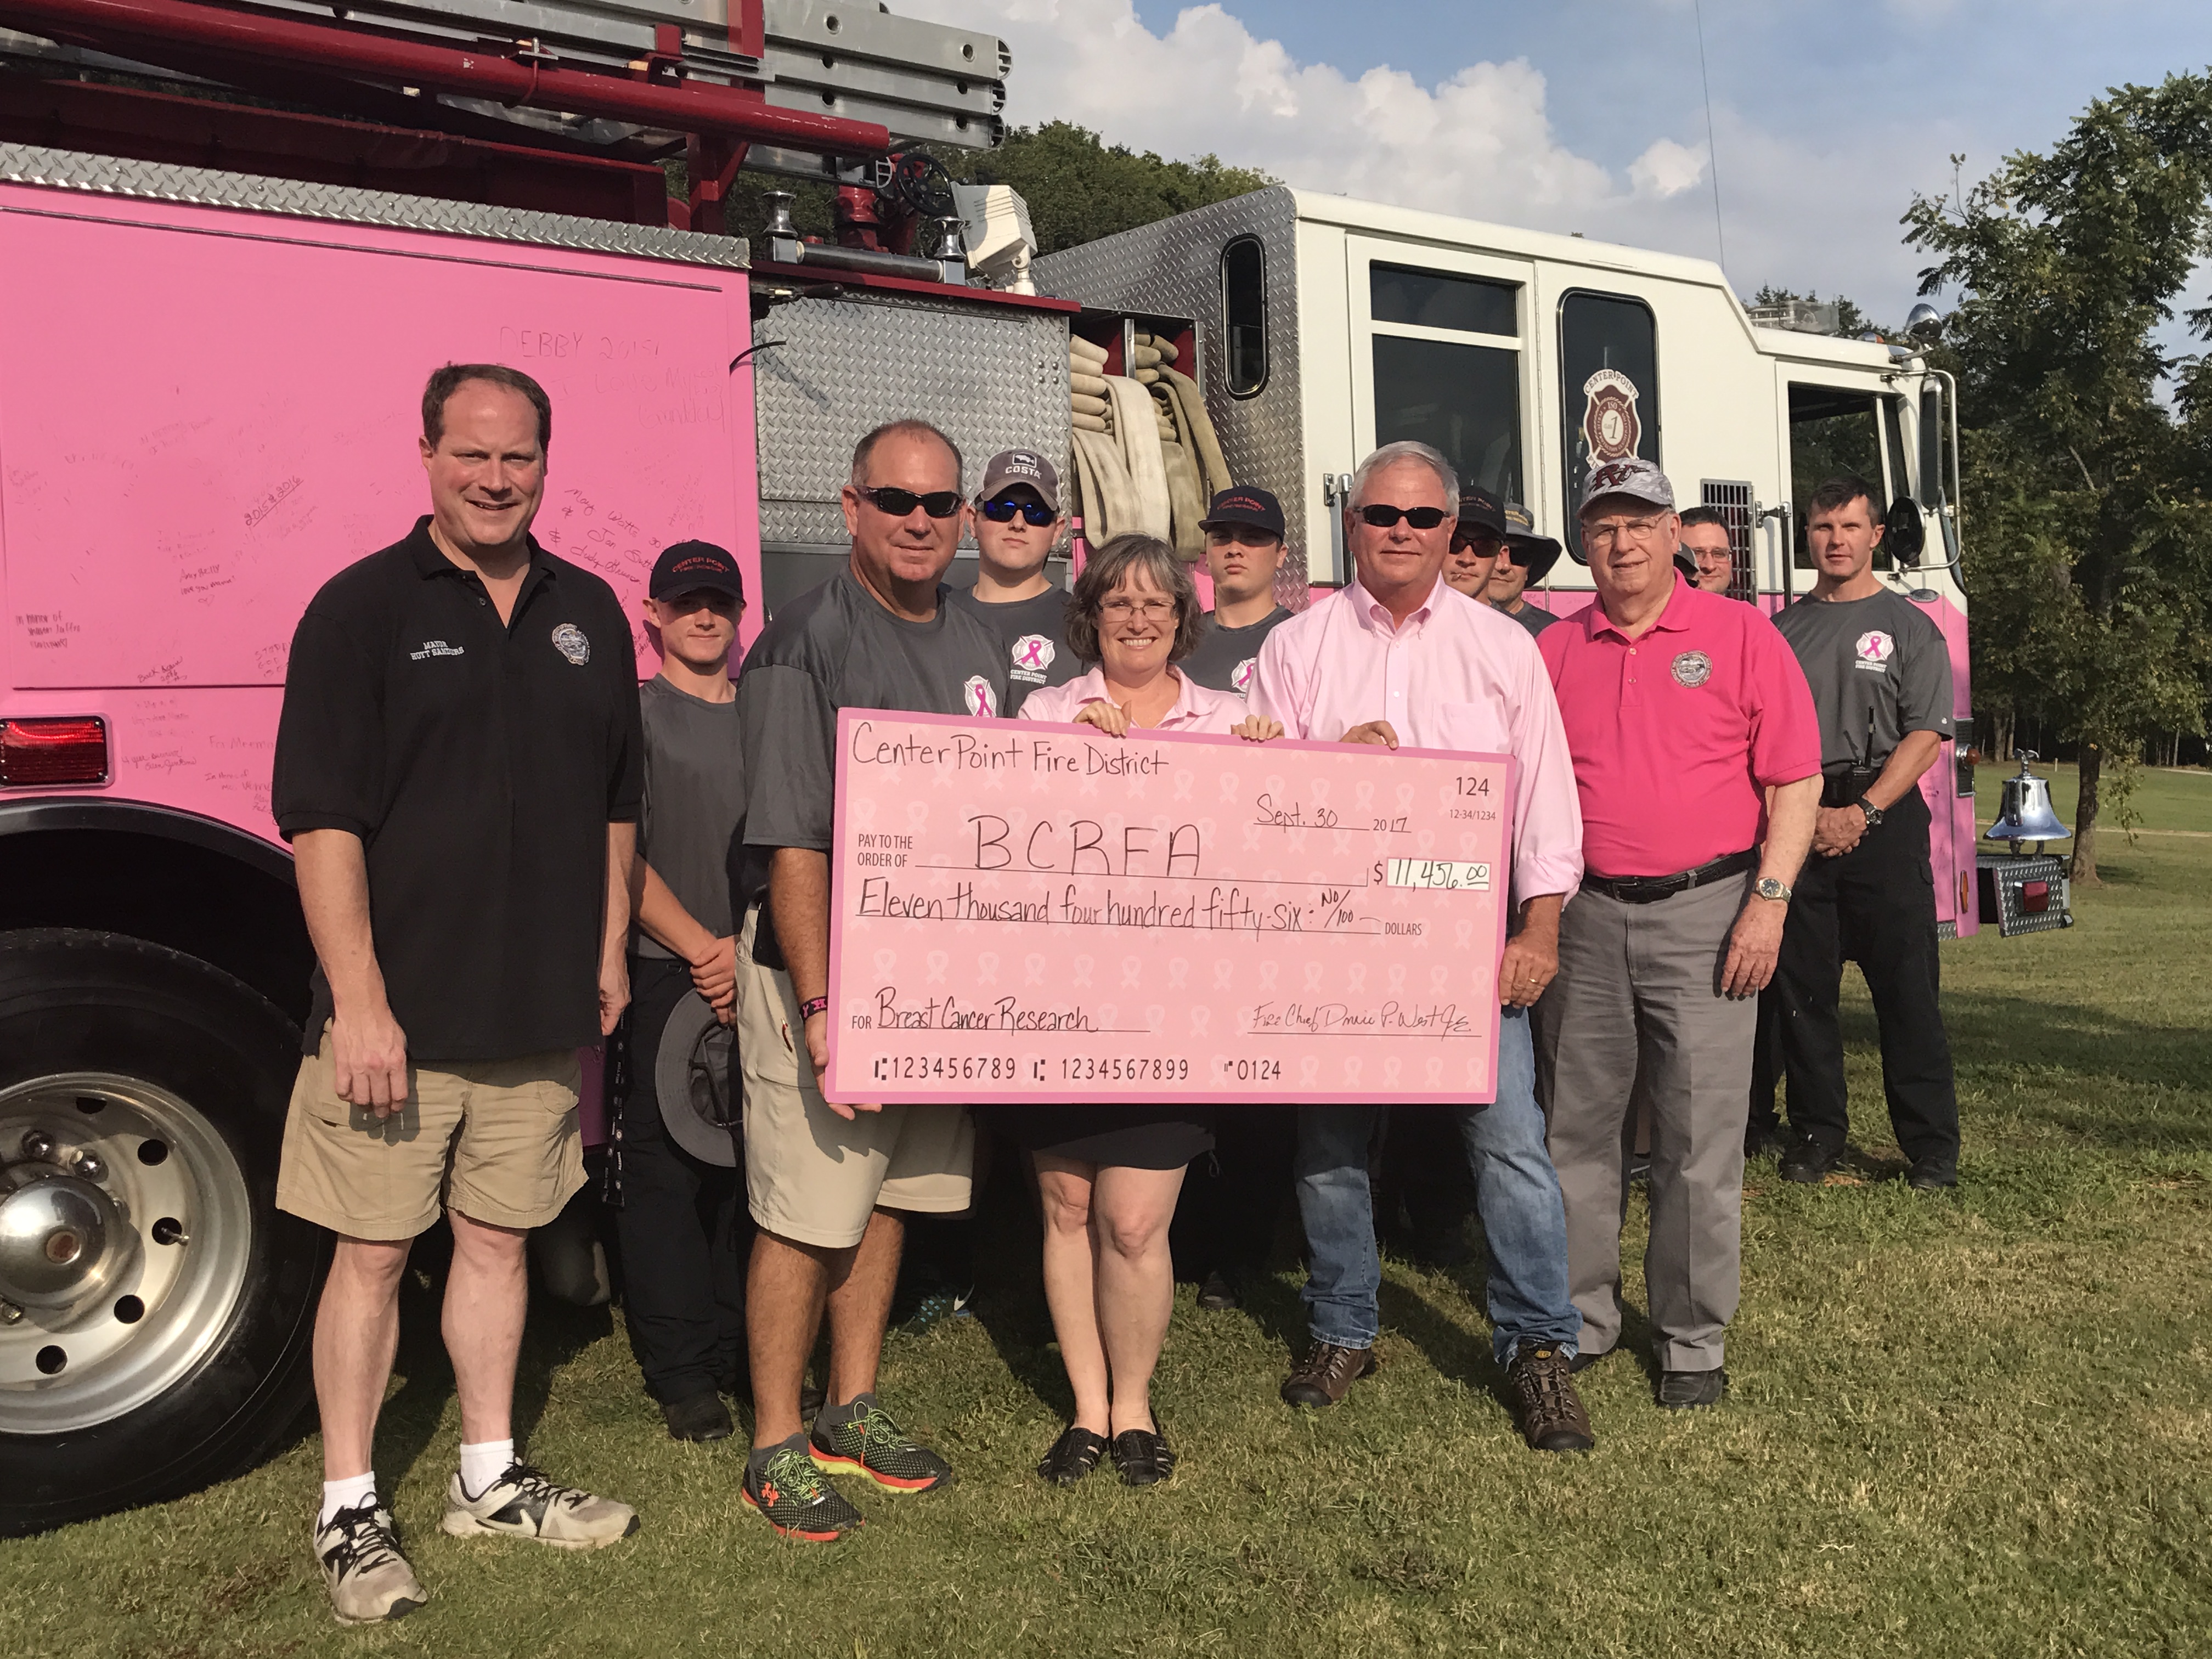 PINSON IN PINK: City, Center Point Fire District, kicks off Breast Cancer Awareness Month